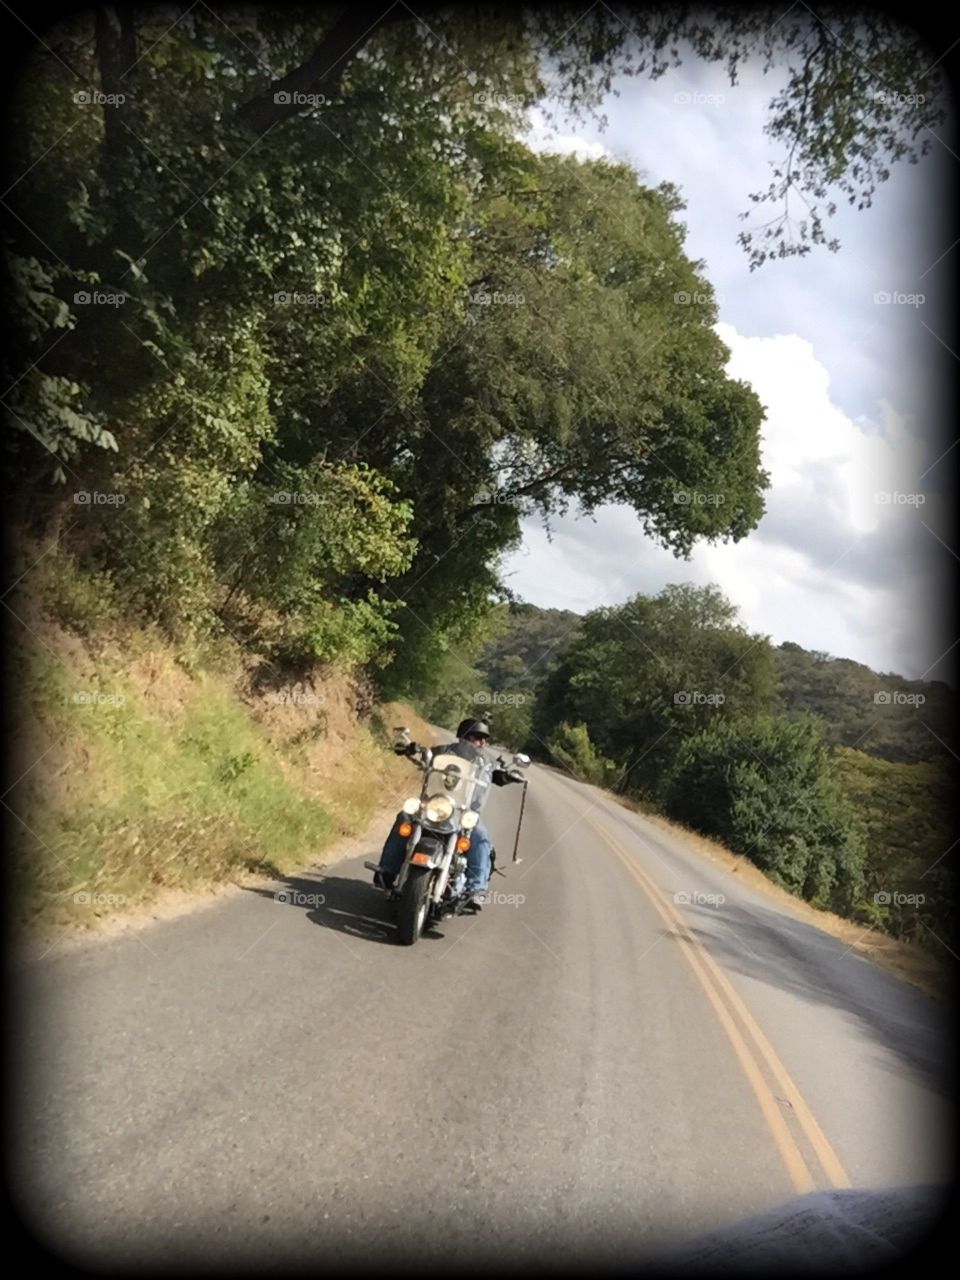 Riding in Texas. This is a friend of mine riding three roads called the three sisters in Texas